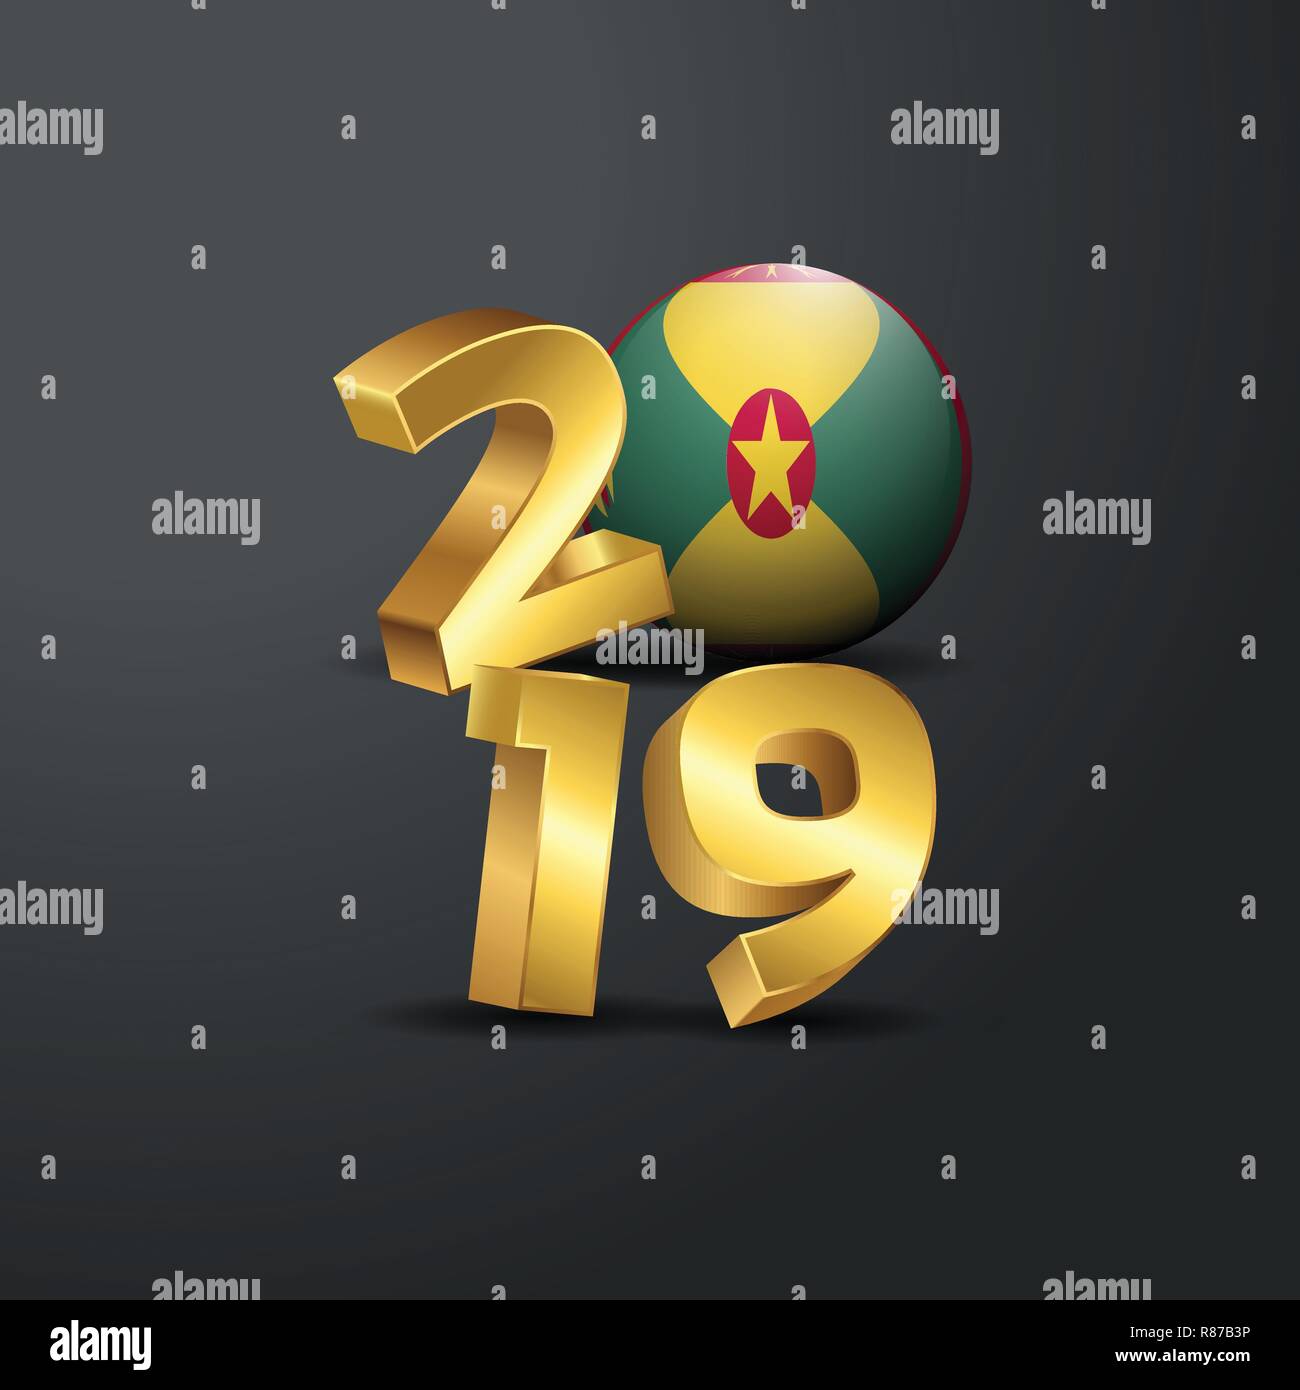 2019 Golden Typography with Grenada Flag. Happy New Year Lettering Stock Vector